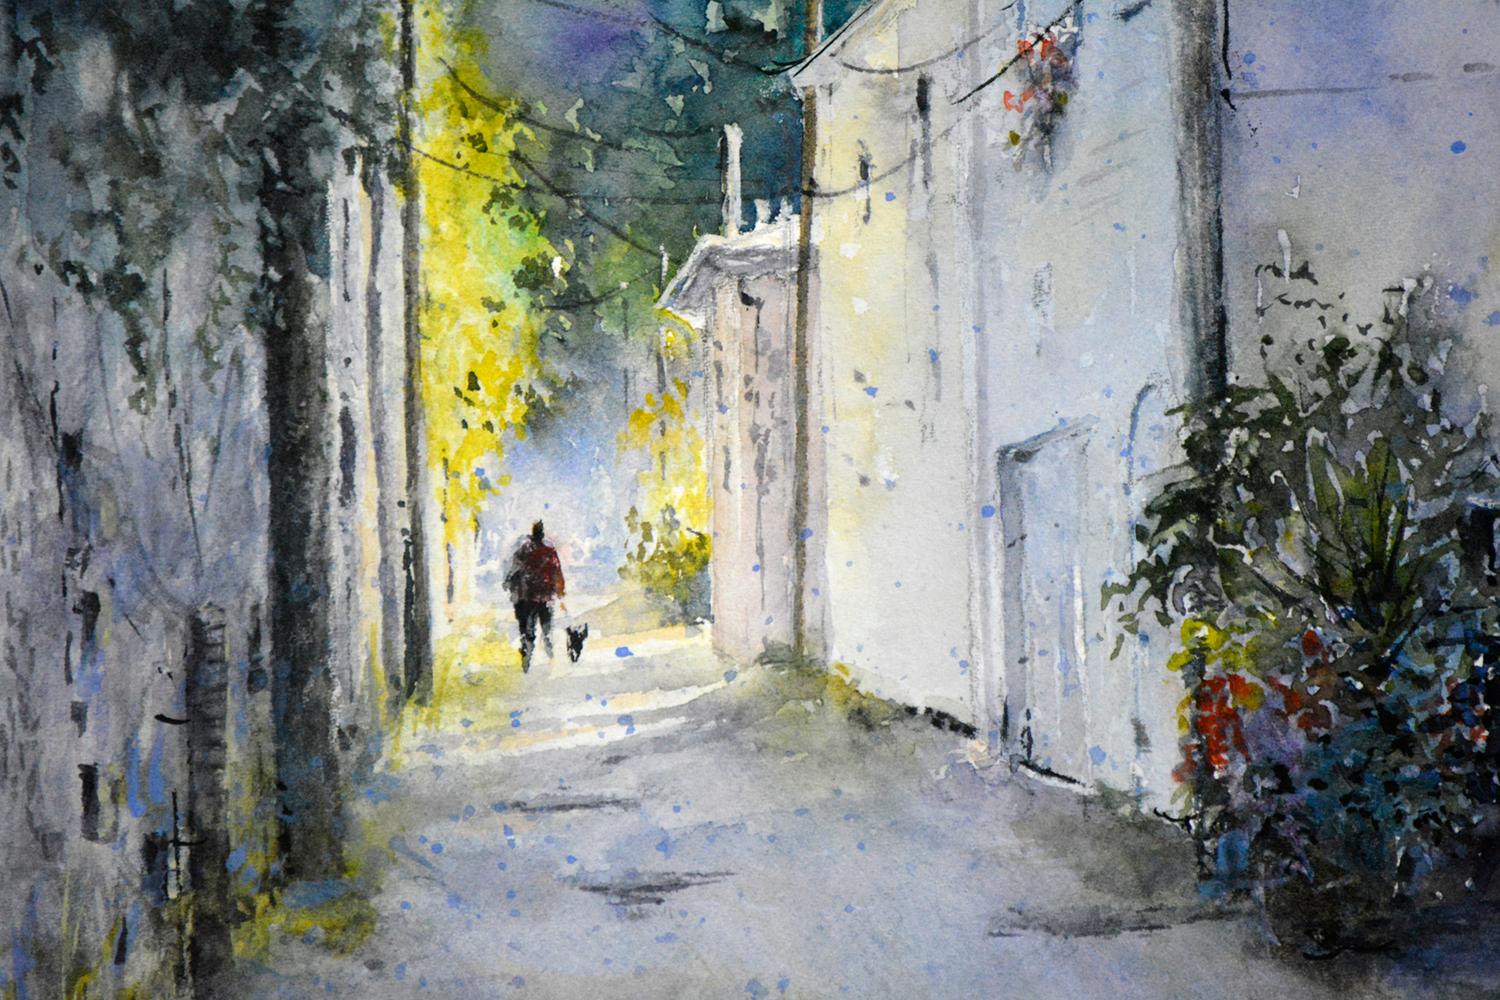 <p>Artist Comments<br>Part of artist Judy Mudd's impressionist City Life series. She pictures an inviting hidden alley discovered while taking photographs of more typical painting scenes. The intriguing play of light and shadow highlights the quaint